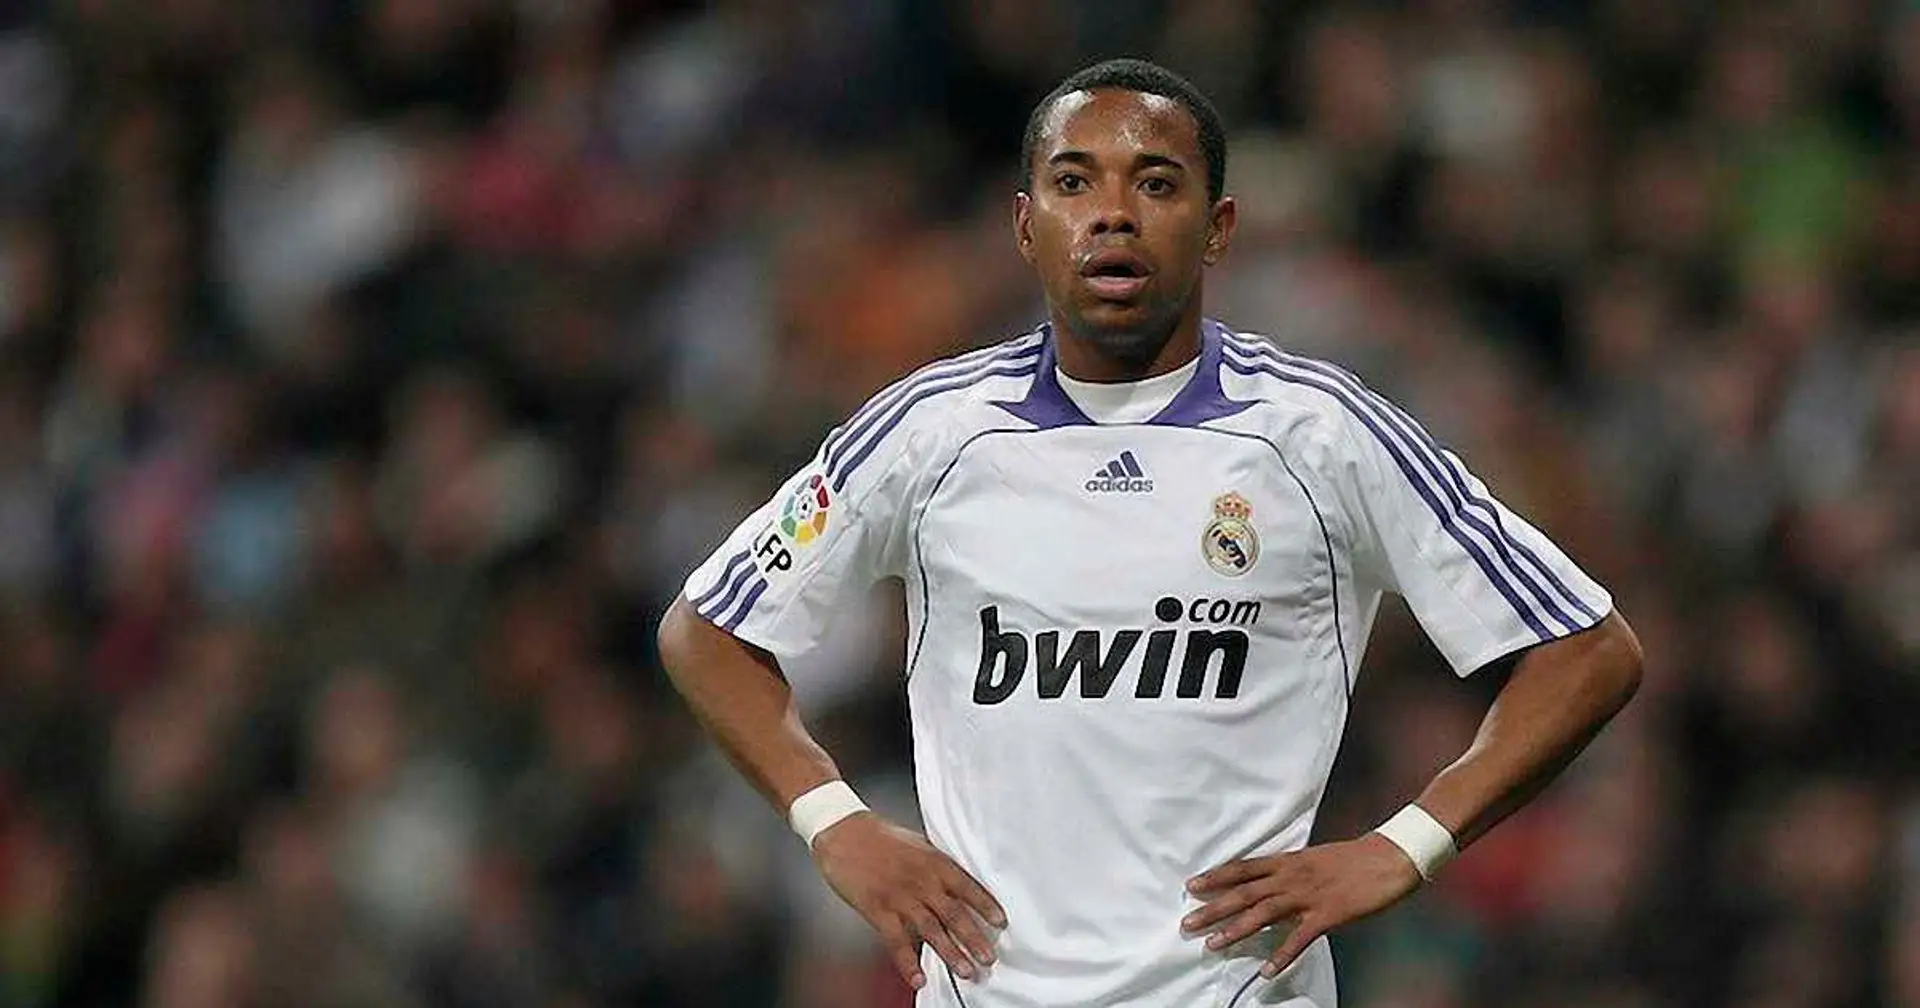 Robinho to serve 9 years in prison for sexual violence as his 'appeal rejected'